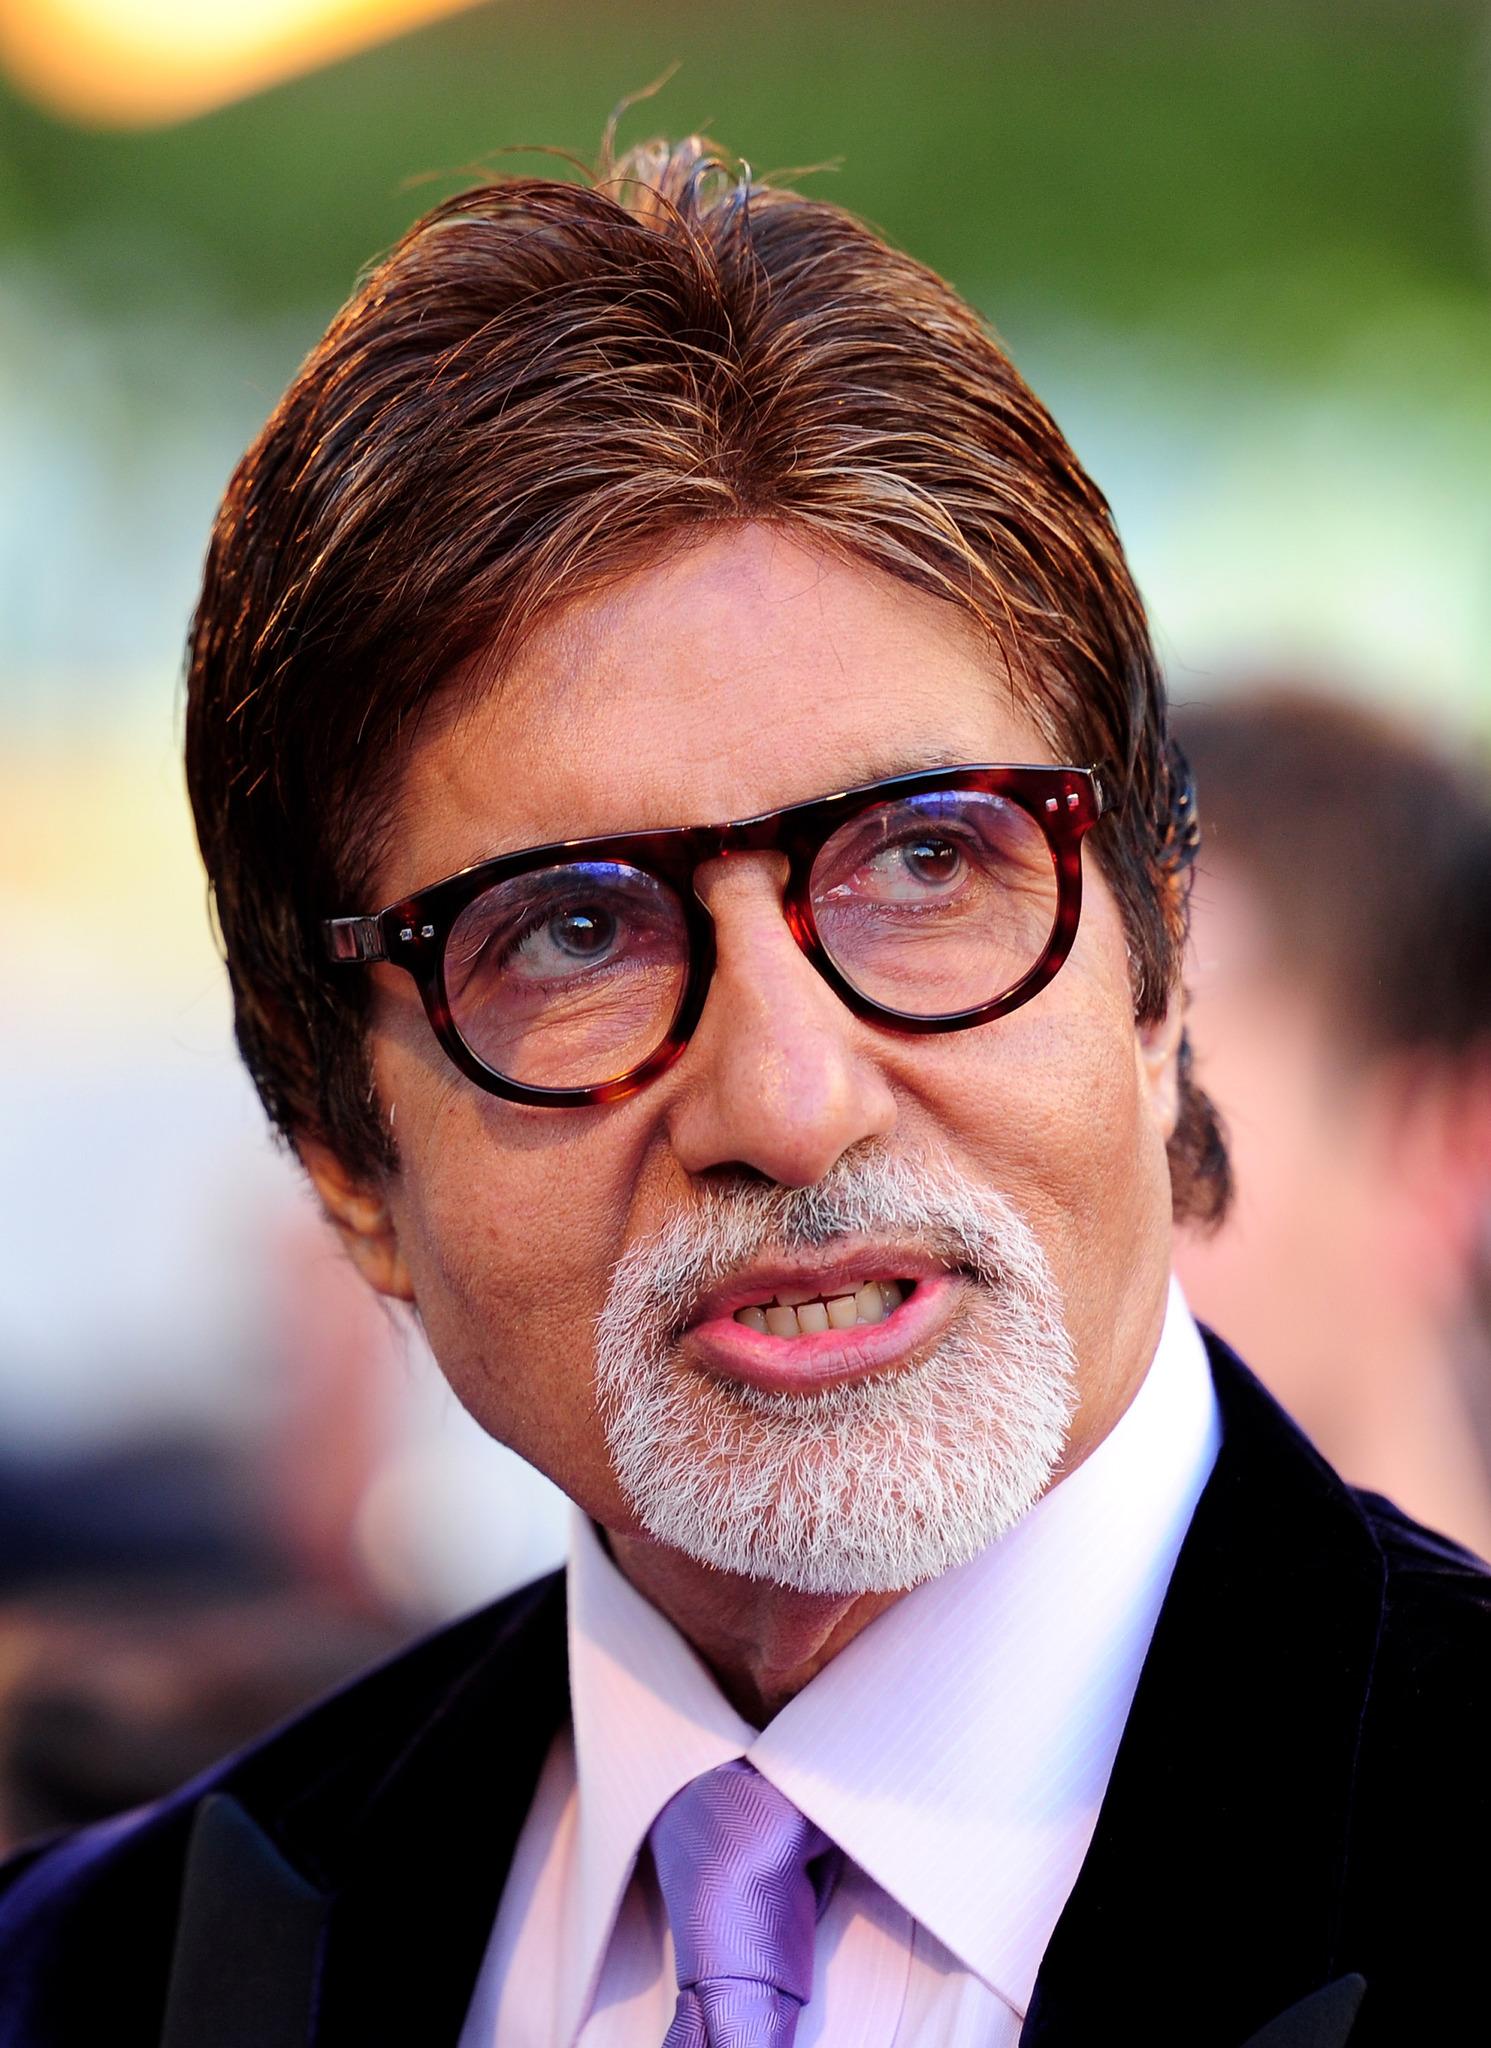 2nd GenerationAmitabh Bachchan, often hailed as the greatest actor in Indian cinema history, brought the family's star power to new heights. He emerged as the 